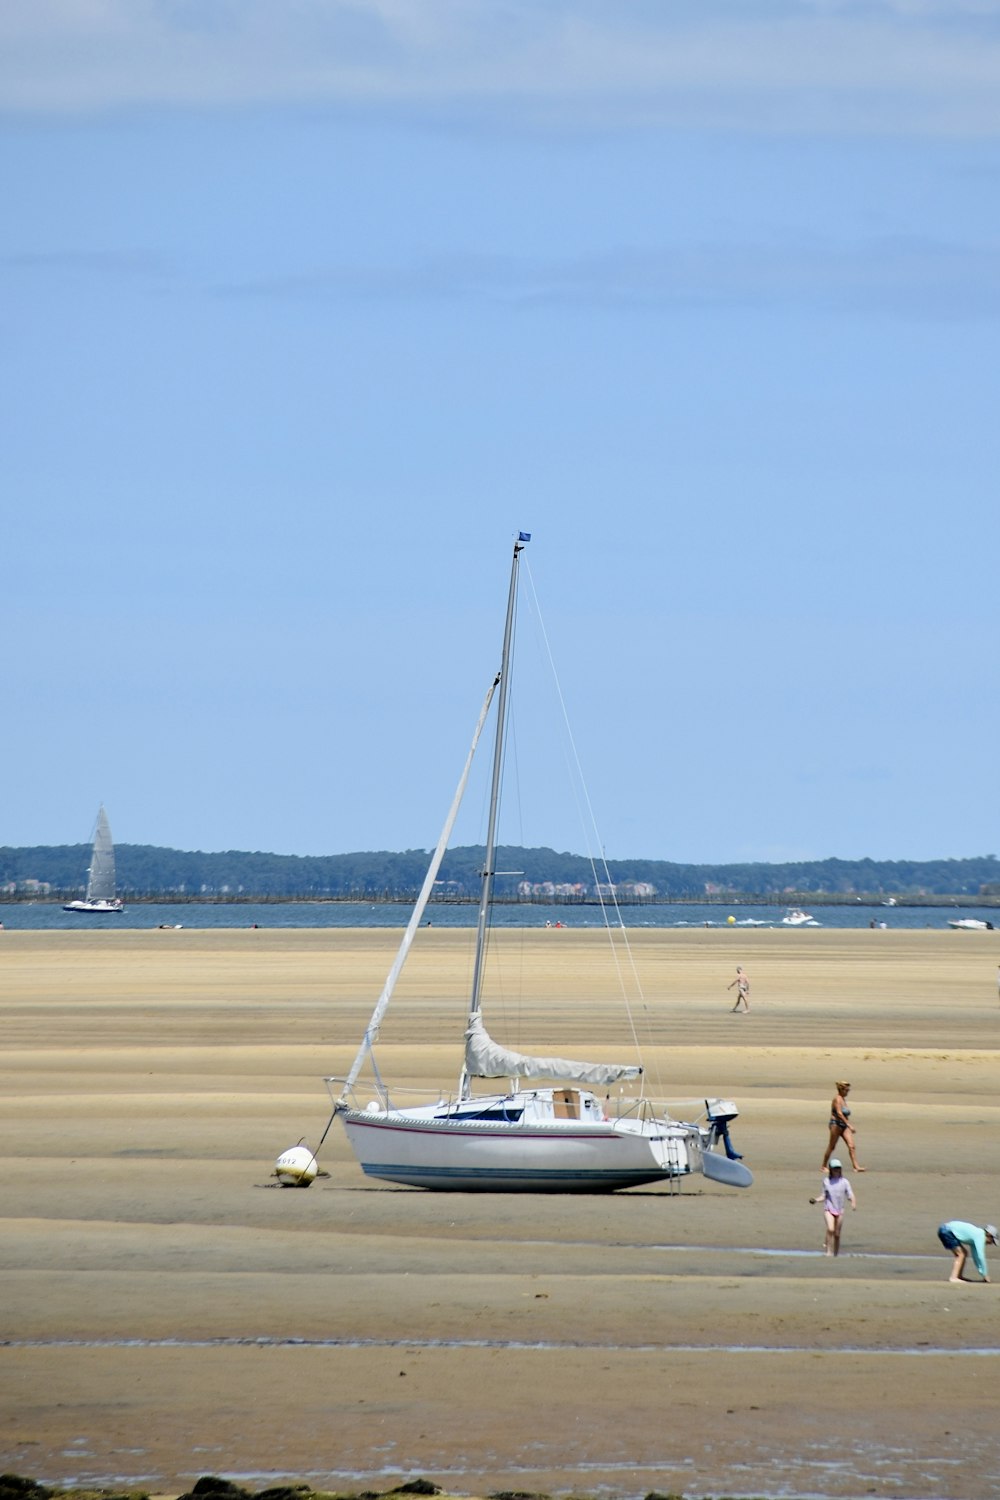 a sailboat on the beach with people standing around it